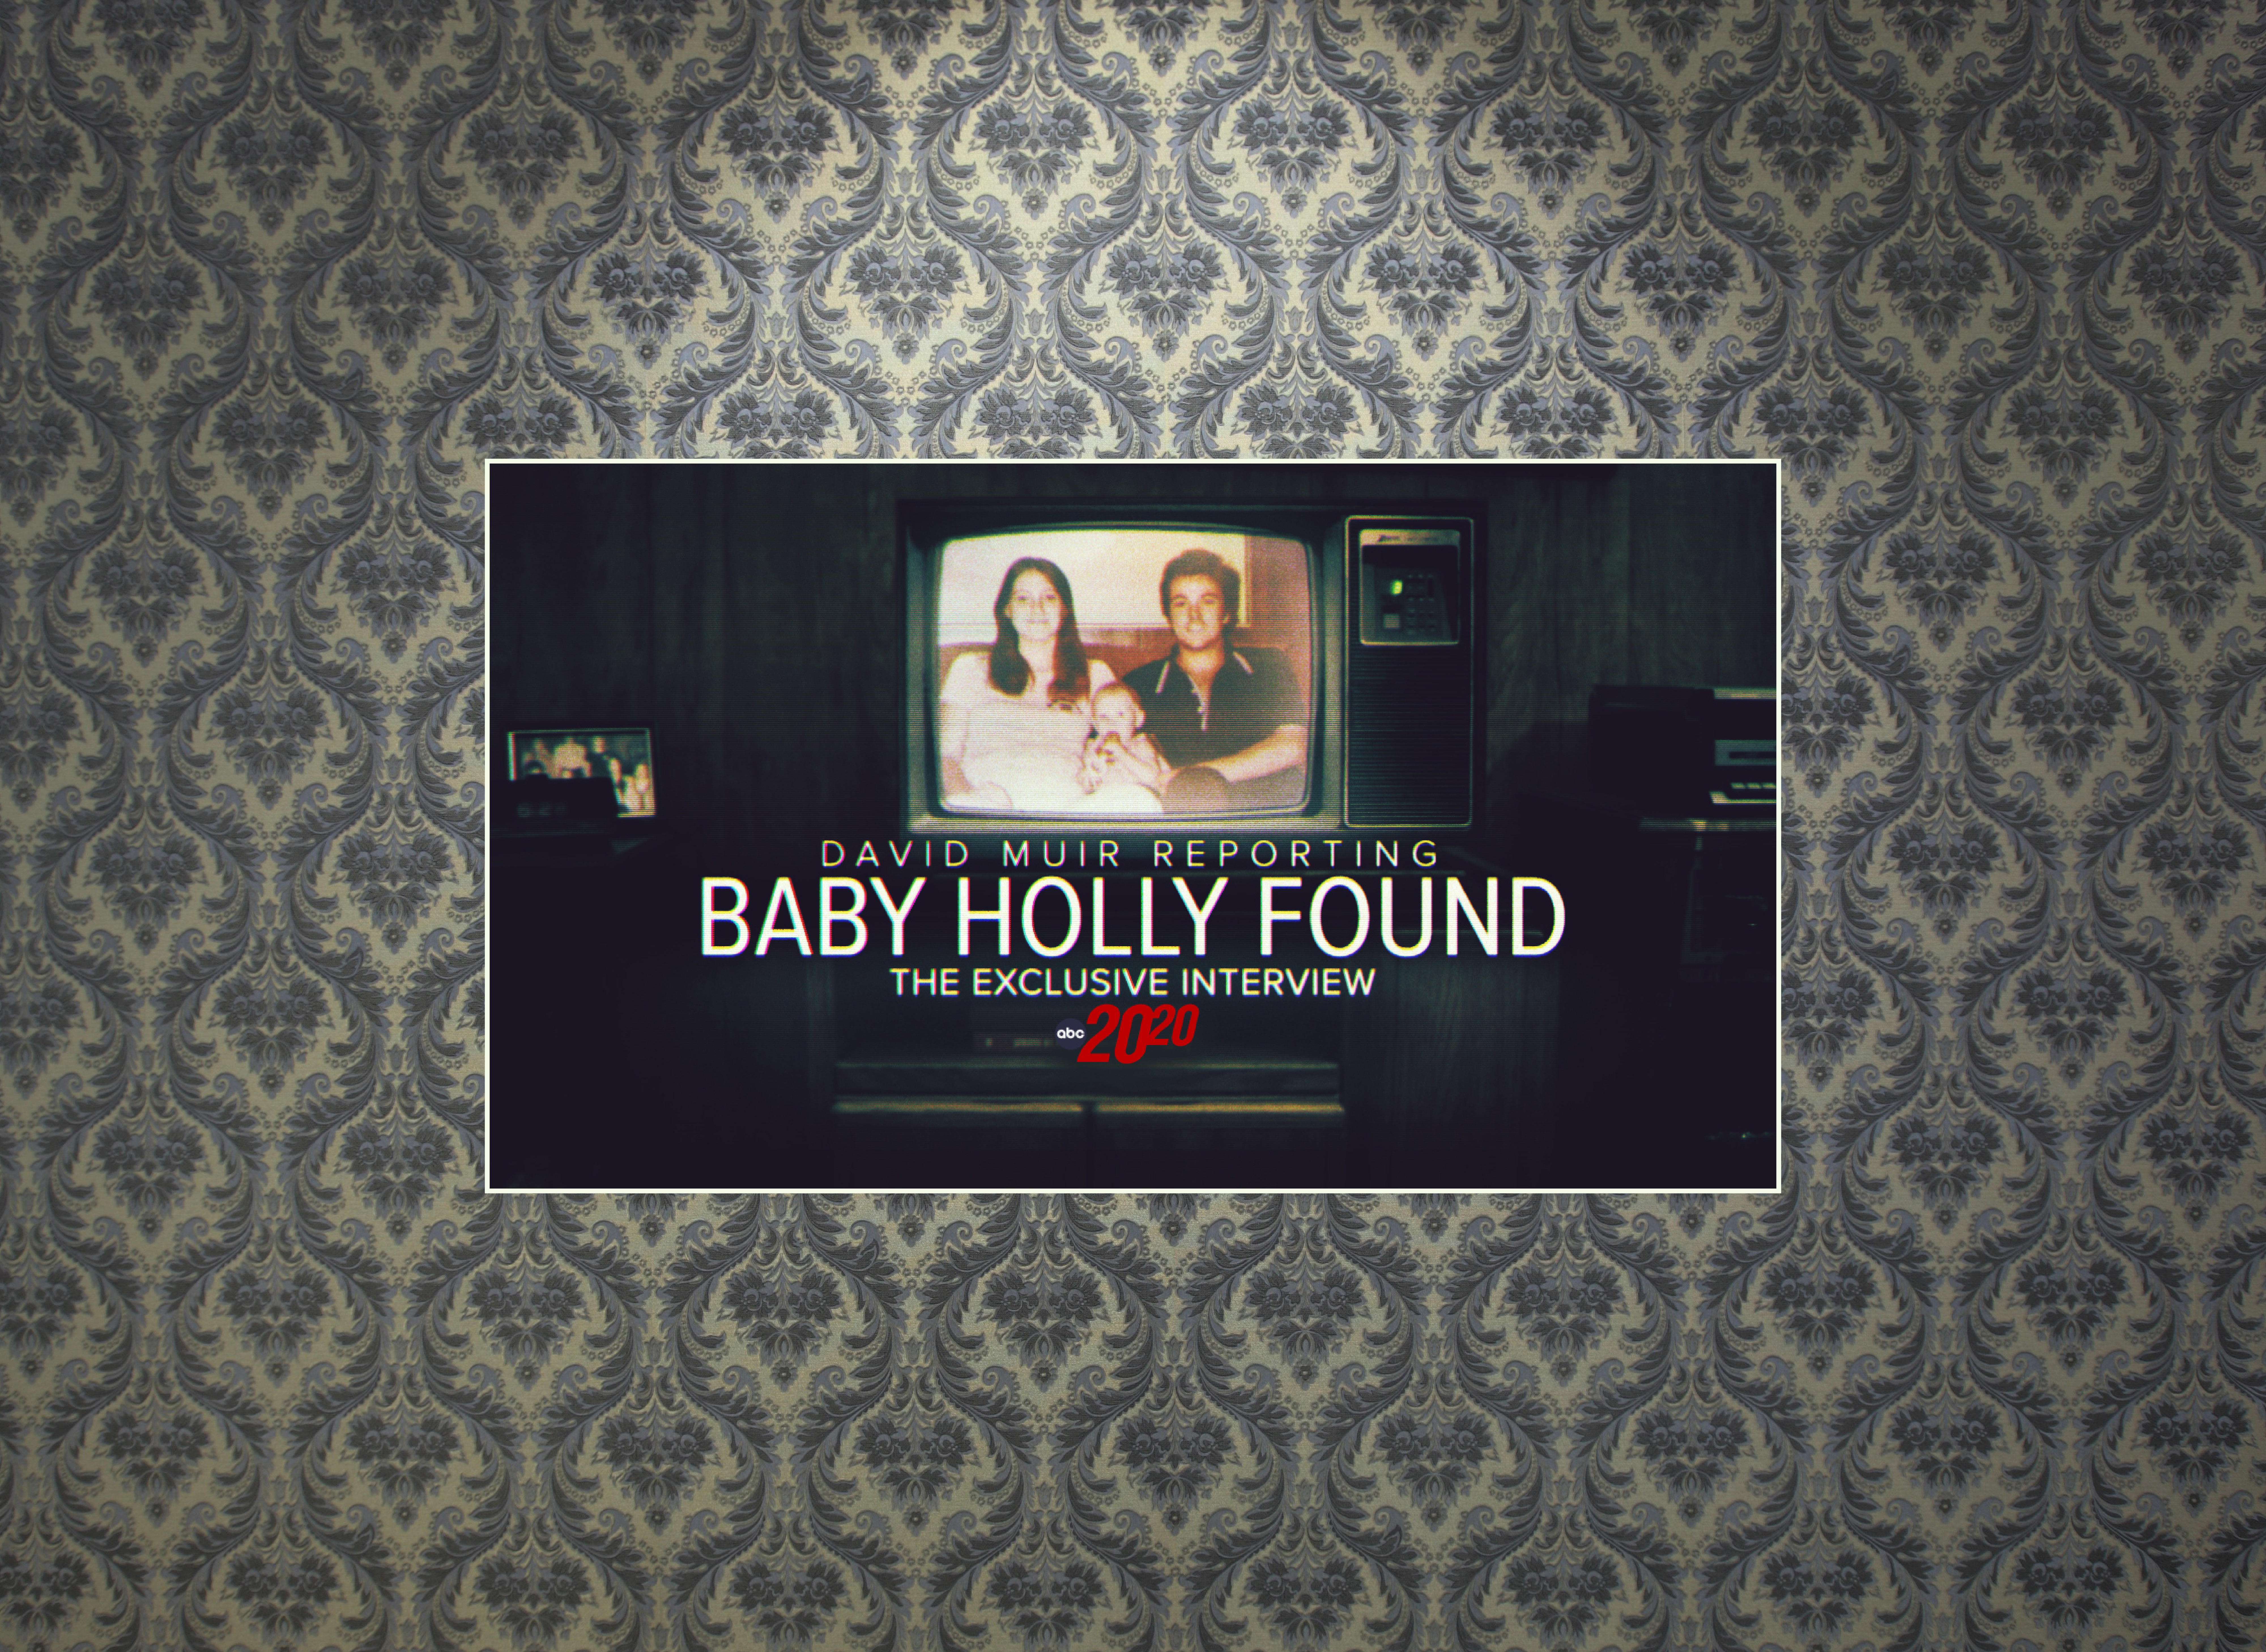 abc 20/20 advertisement: holly and her parents on an old tv screen